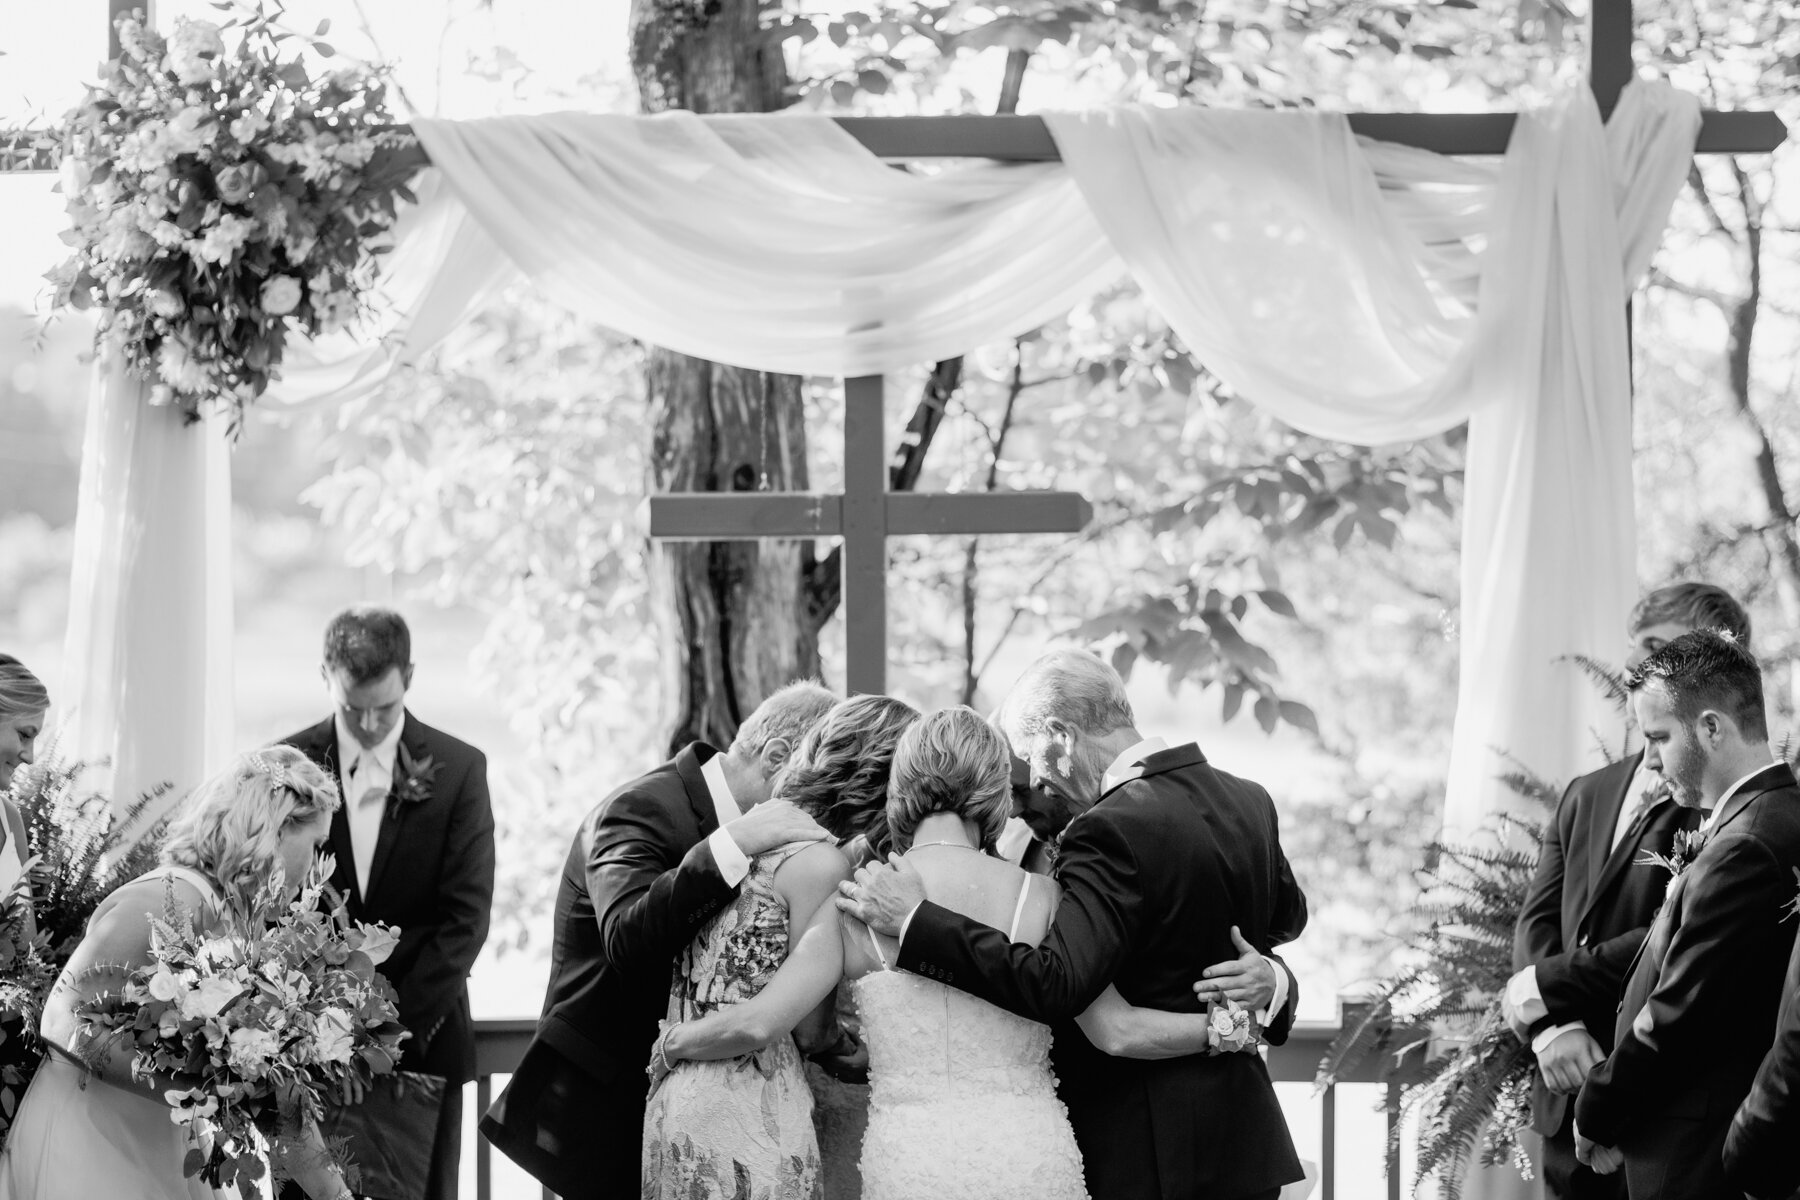 sunny outdoor wedding at hunter valley farms in knoxville tennessee